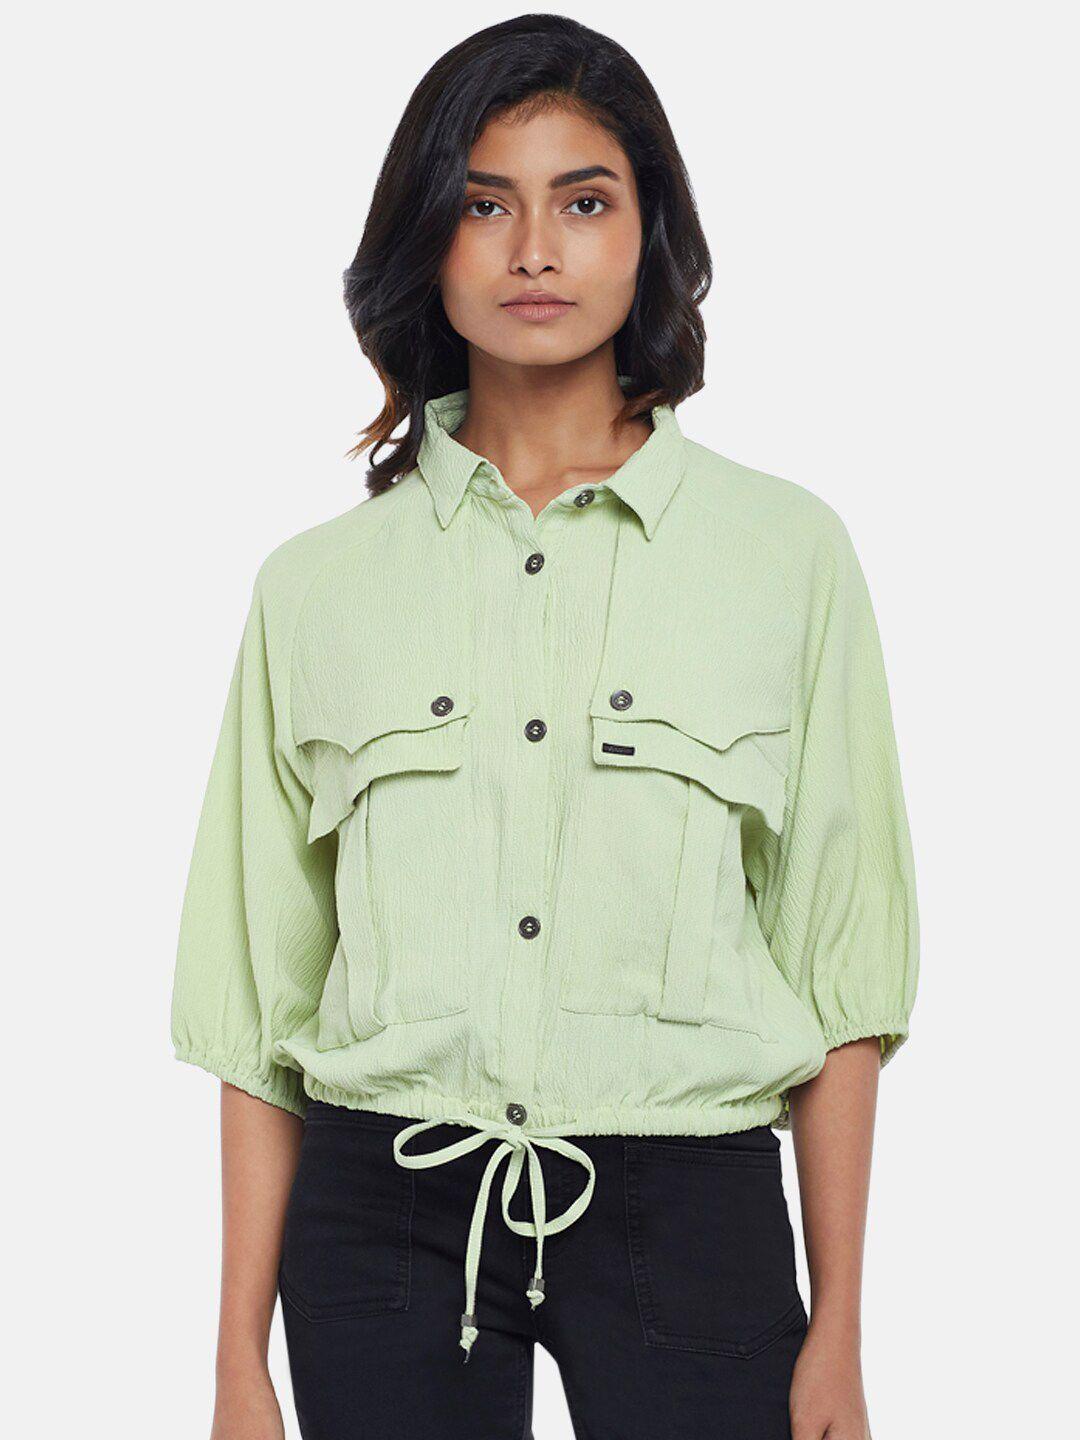 sf-jeans-by-pantaloons-women-olive-green-regular-fit-casual-shirt